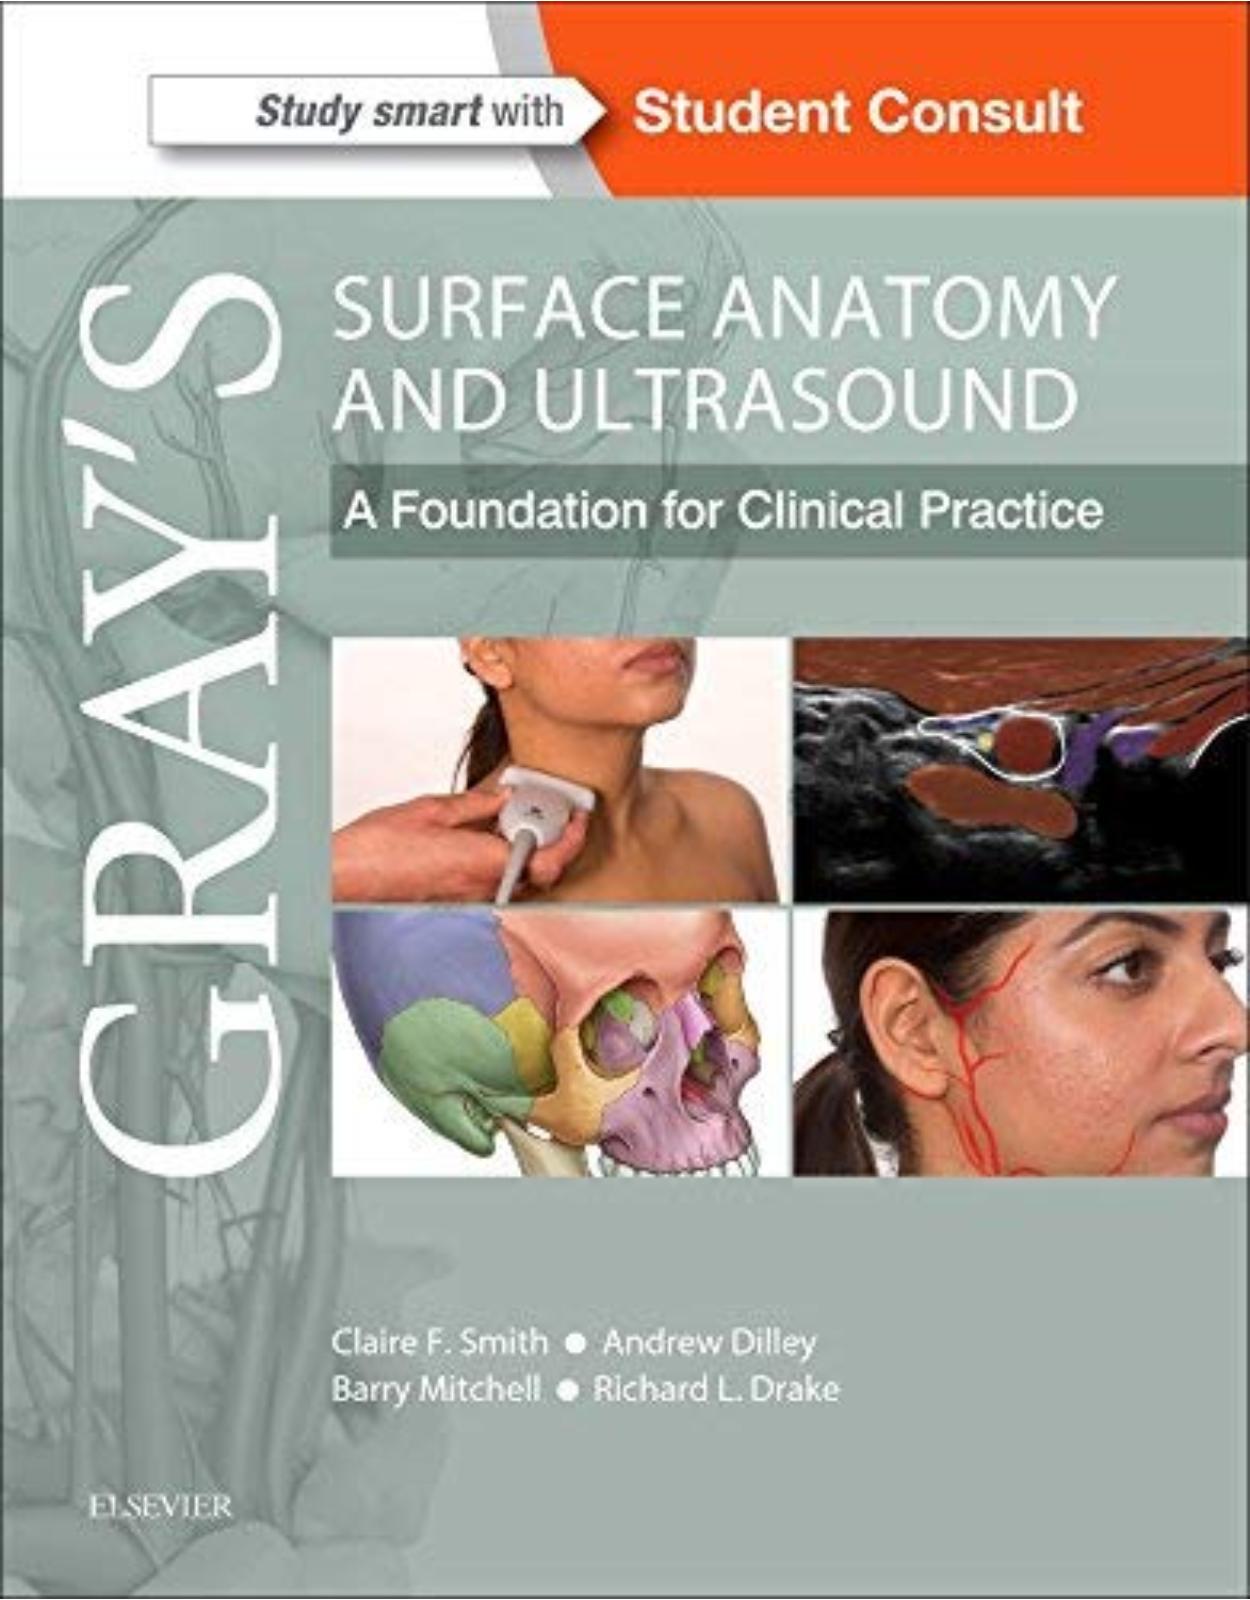 Gray's Surface Anatomy and Ultrasound: A Foundation for Clinical Practice, 1e